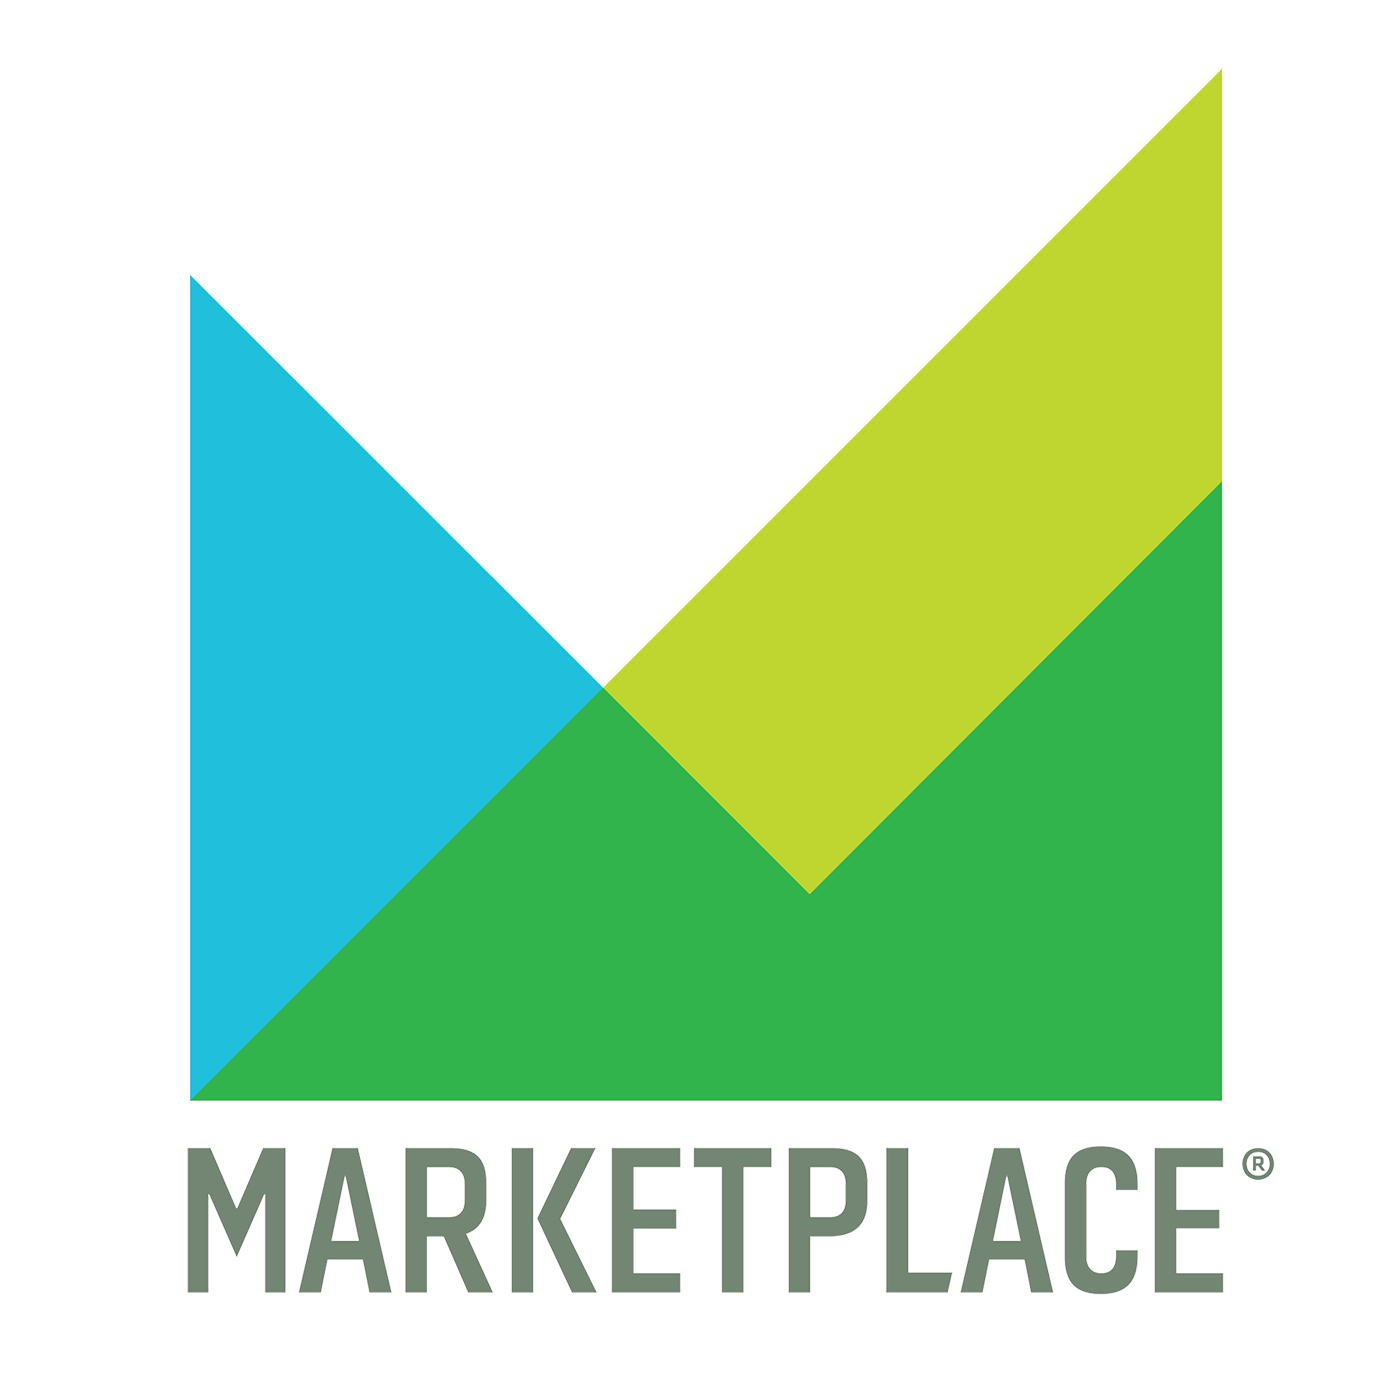 Trade is Still a Mess: Gretchen Blough on Marketplace Podcast